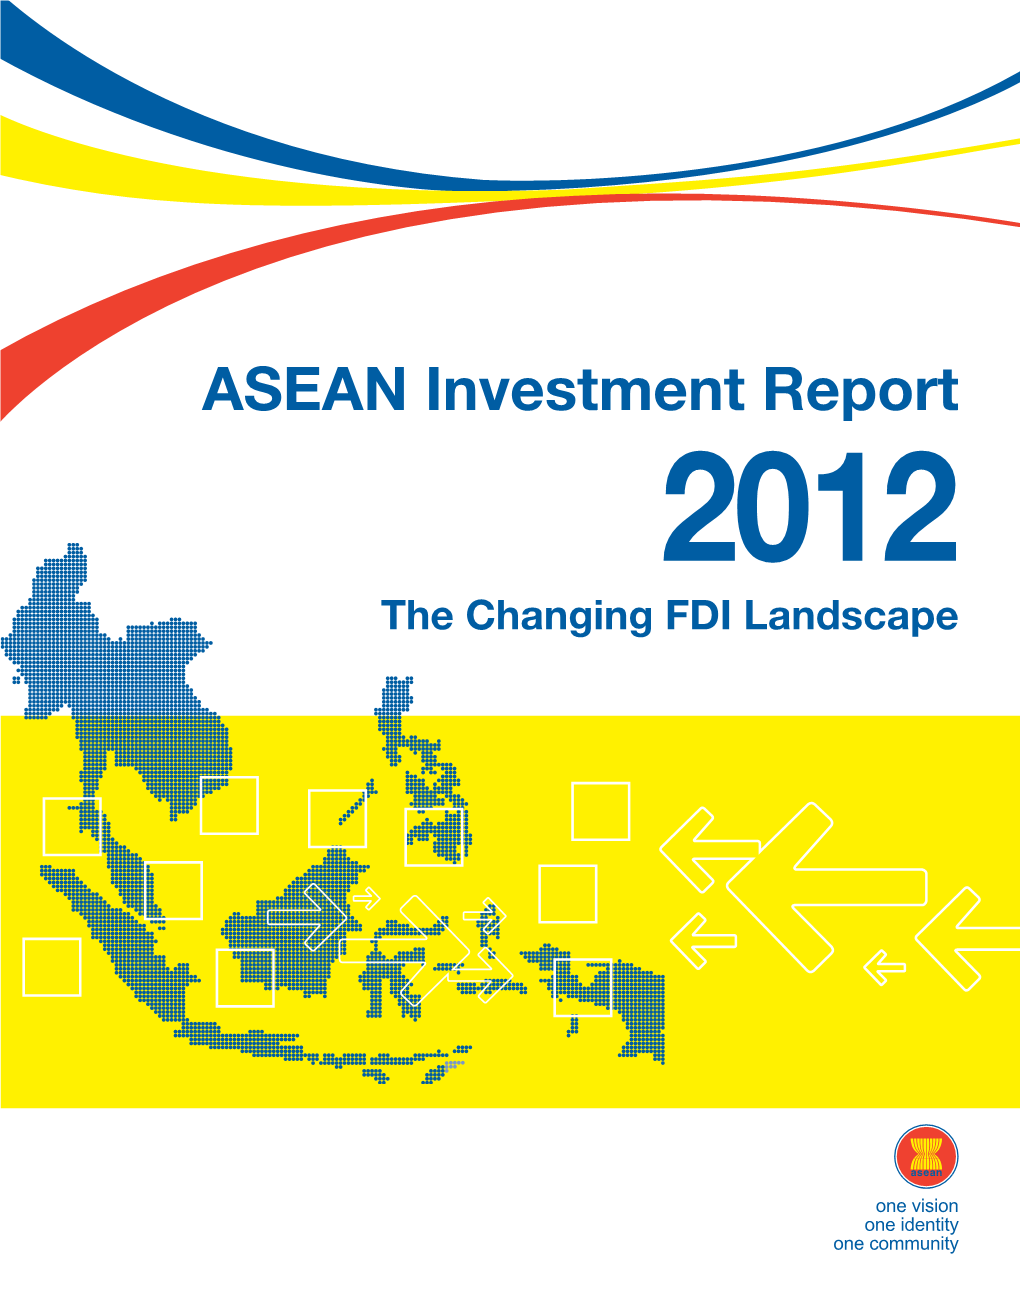 ASEAN Investment Report 2012 the Changing FDI Landscape